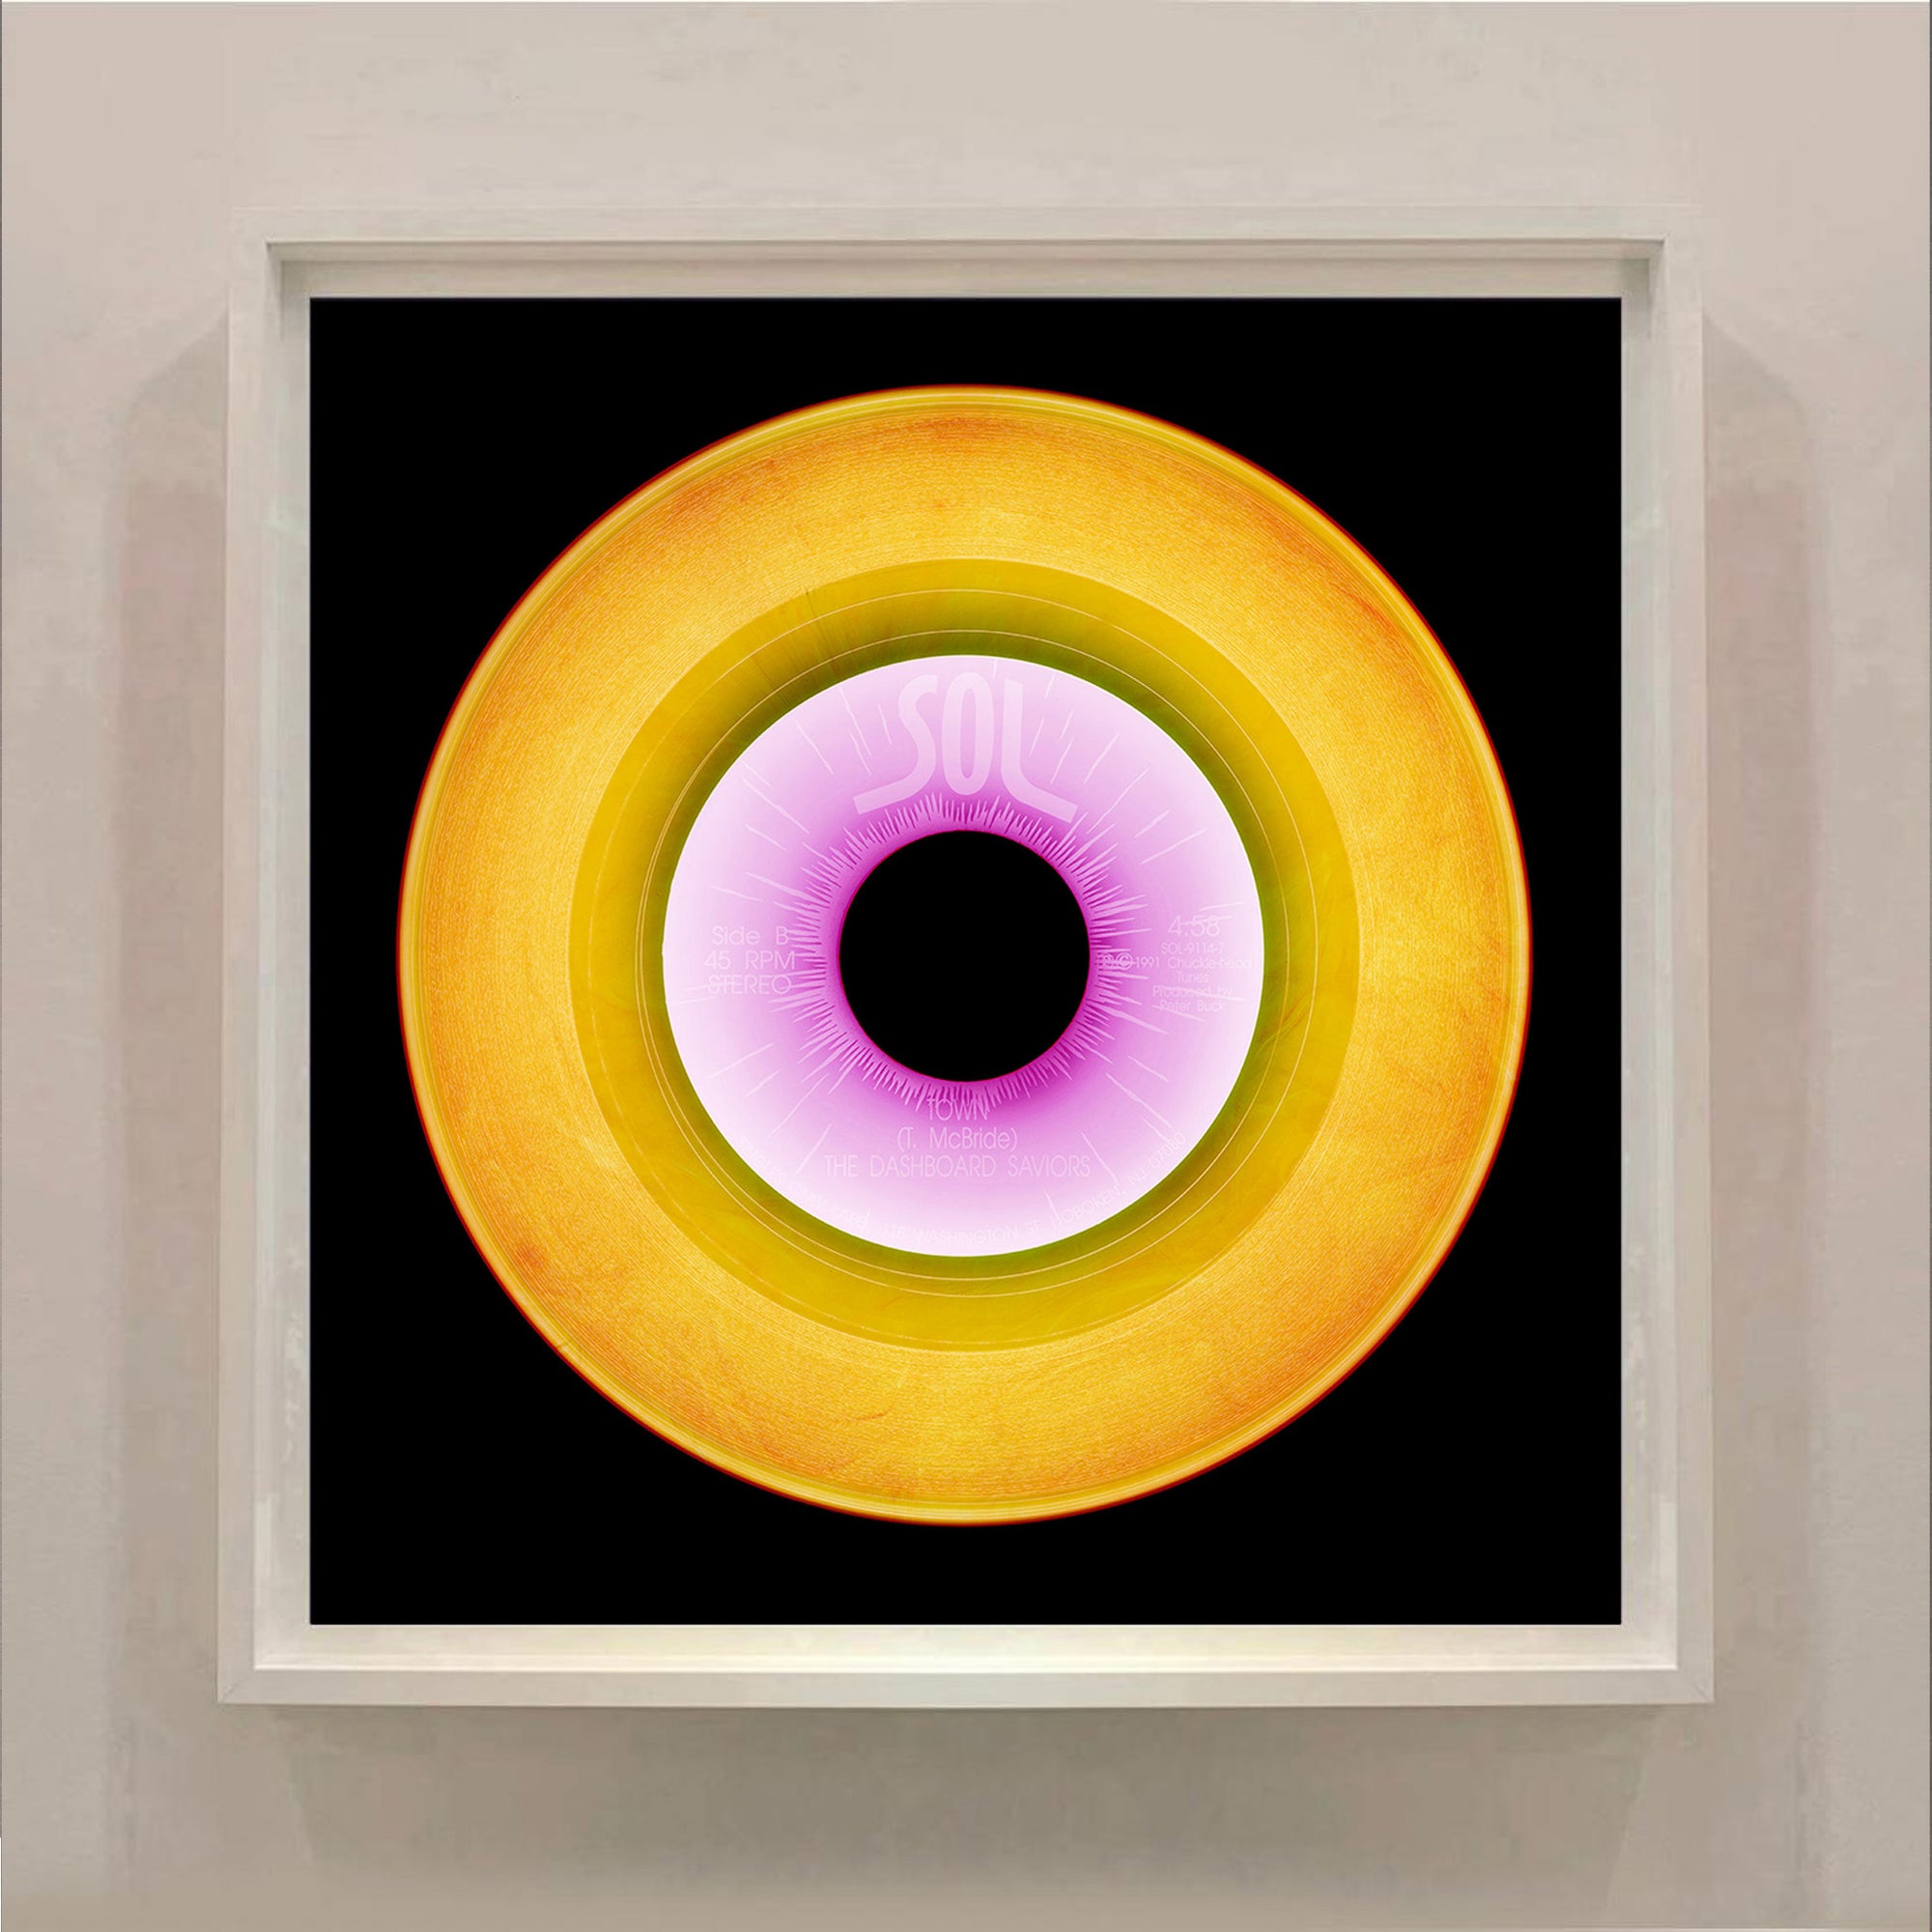 Bright gold yellow pop art from the Heidler and Heeps vinyl collection framed in white.